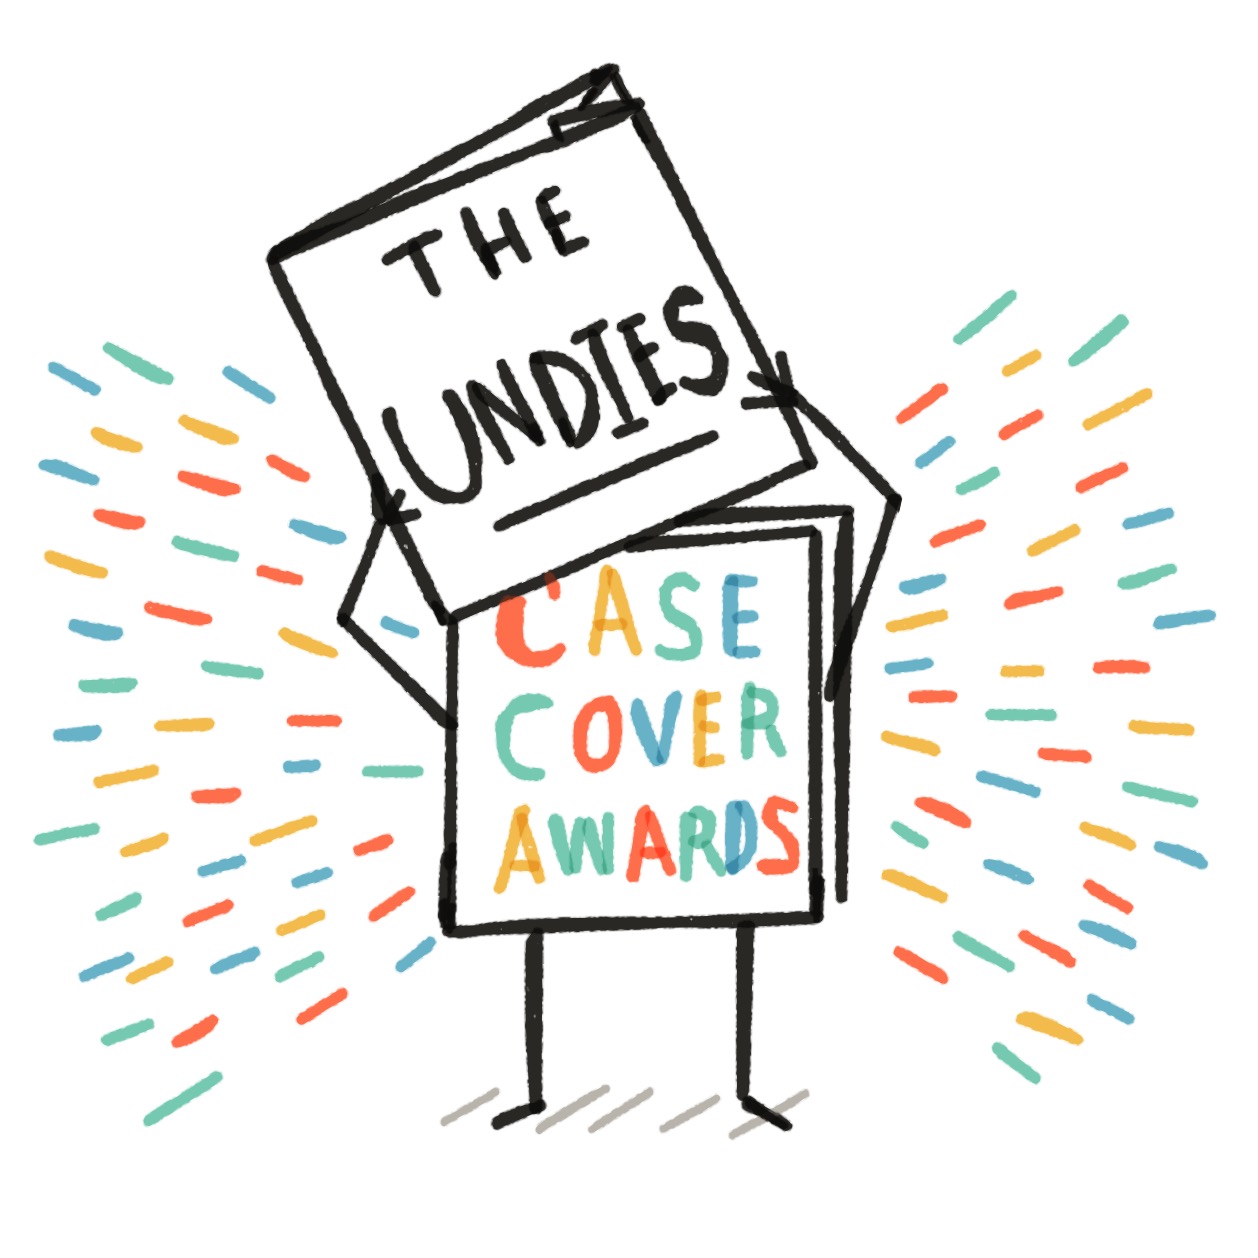 Nominations Are Open for the 2022 Undies Case Cover Awards